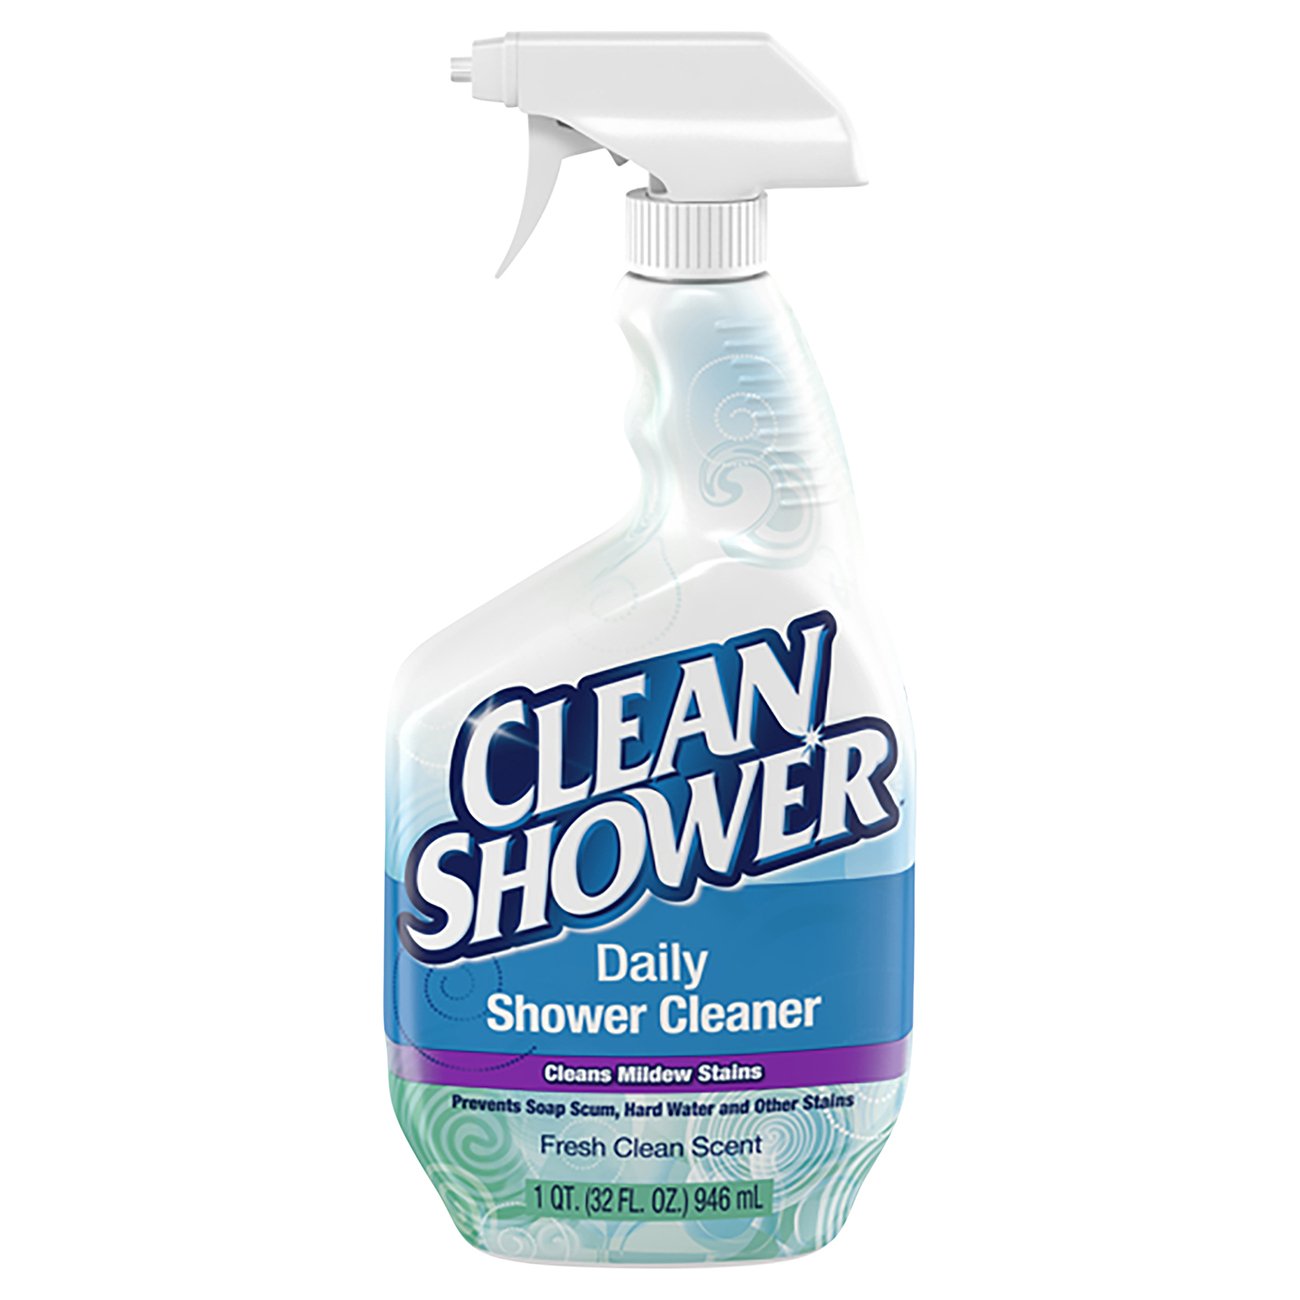 How to Clean a Shower the Easy Way  Shower cleaner, Cleaning shower tiles,  Best shower cleaner